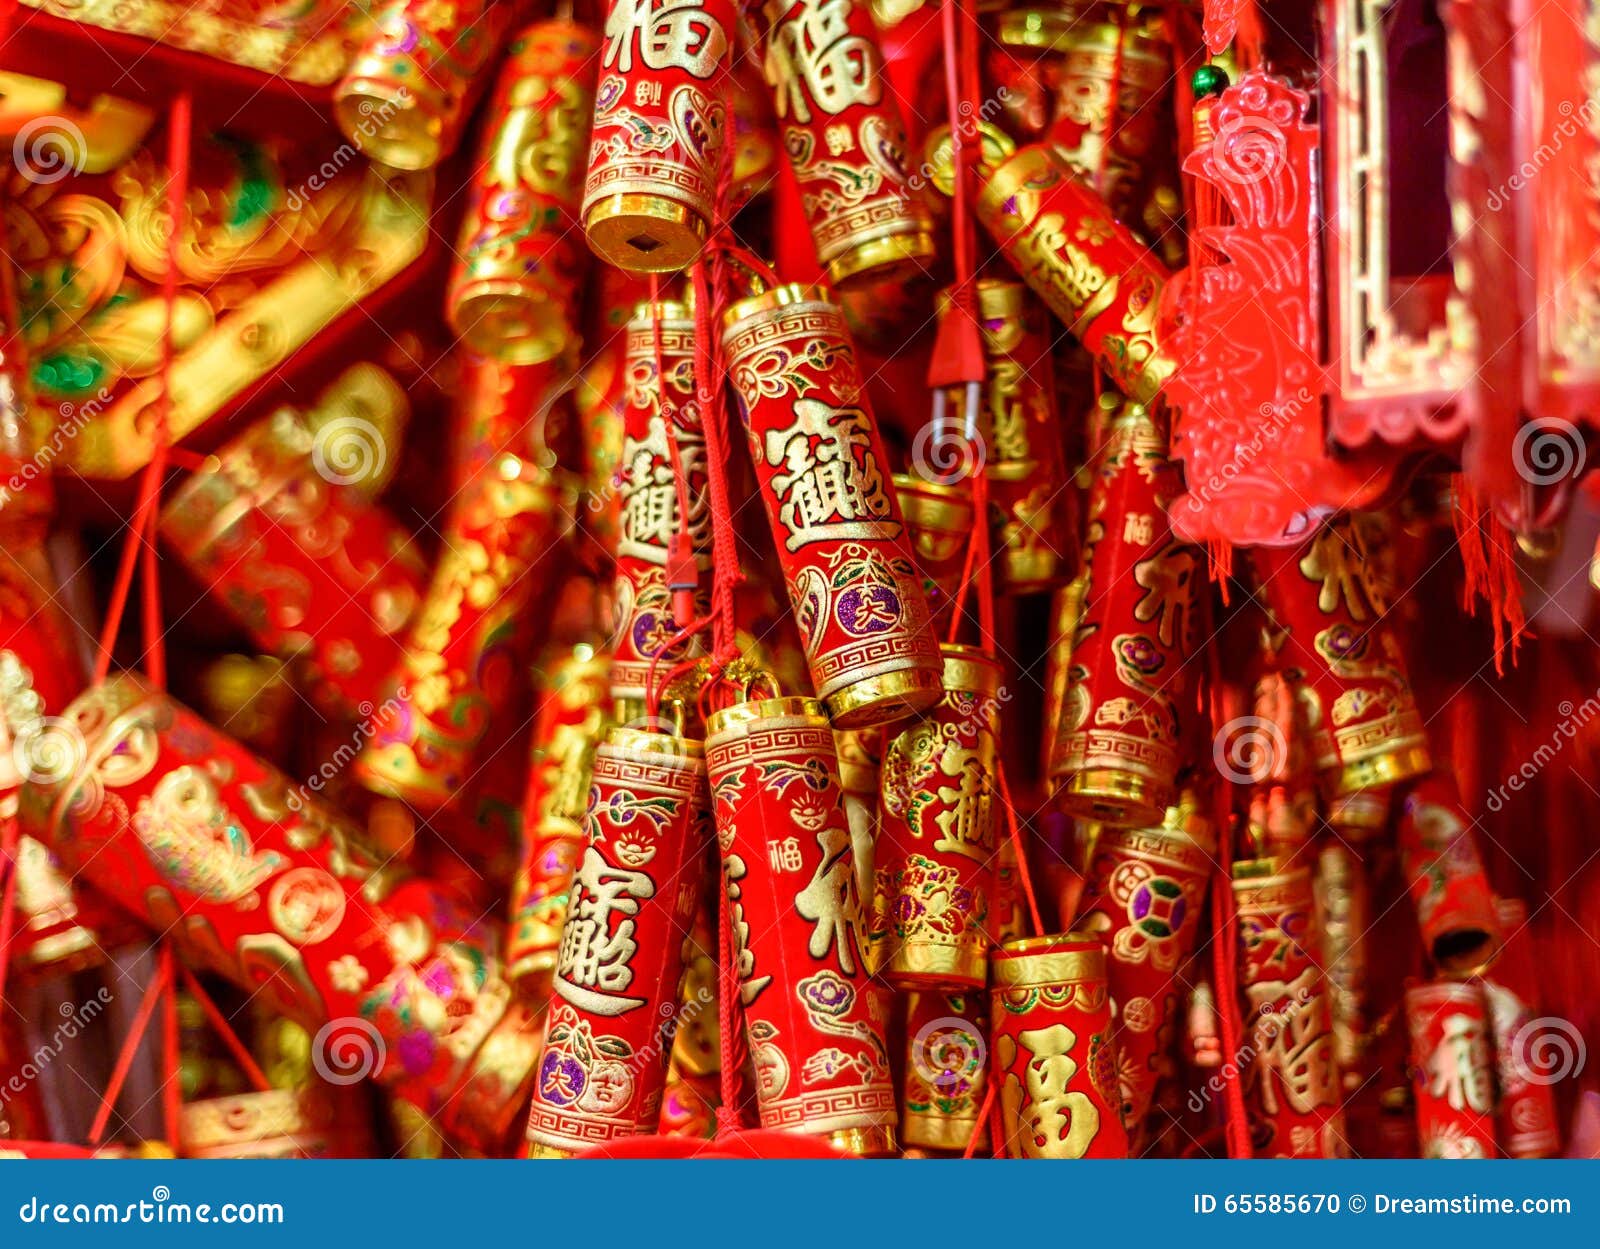 Chinese firecrackers stock photo. Image of away, symbol - 65585670